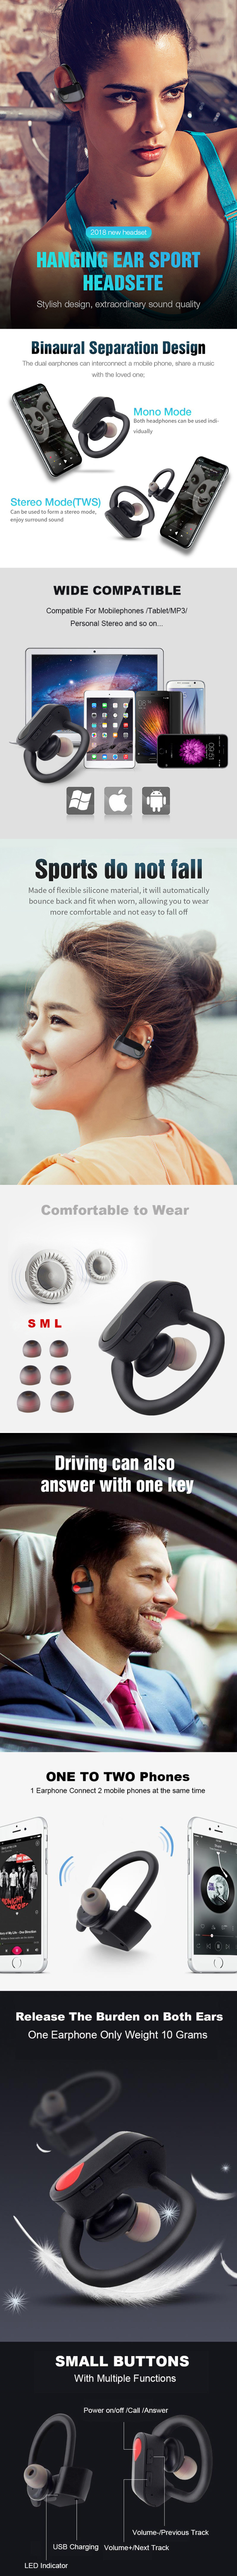 LY-20 TWS Earbuds,LY-20 Bluetooth Headset,LY-20 Bluetooth Earphone,TWS Earbuds Manufacturer,TWS Earbuds Factory,Bluetooth Headset OEM Manufacturer